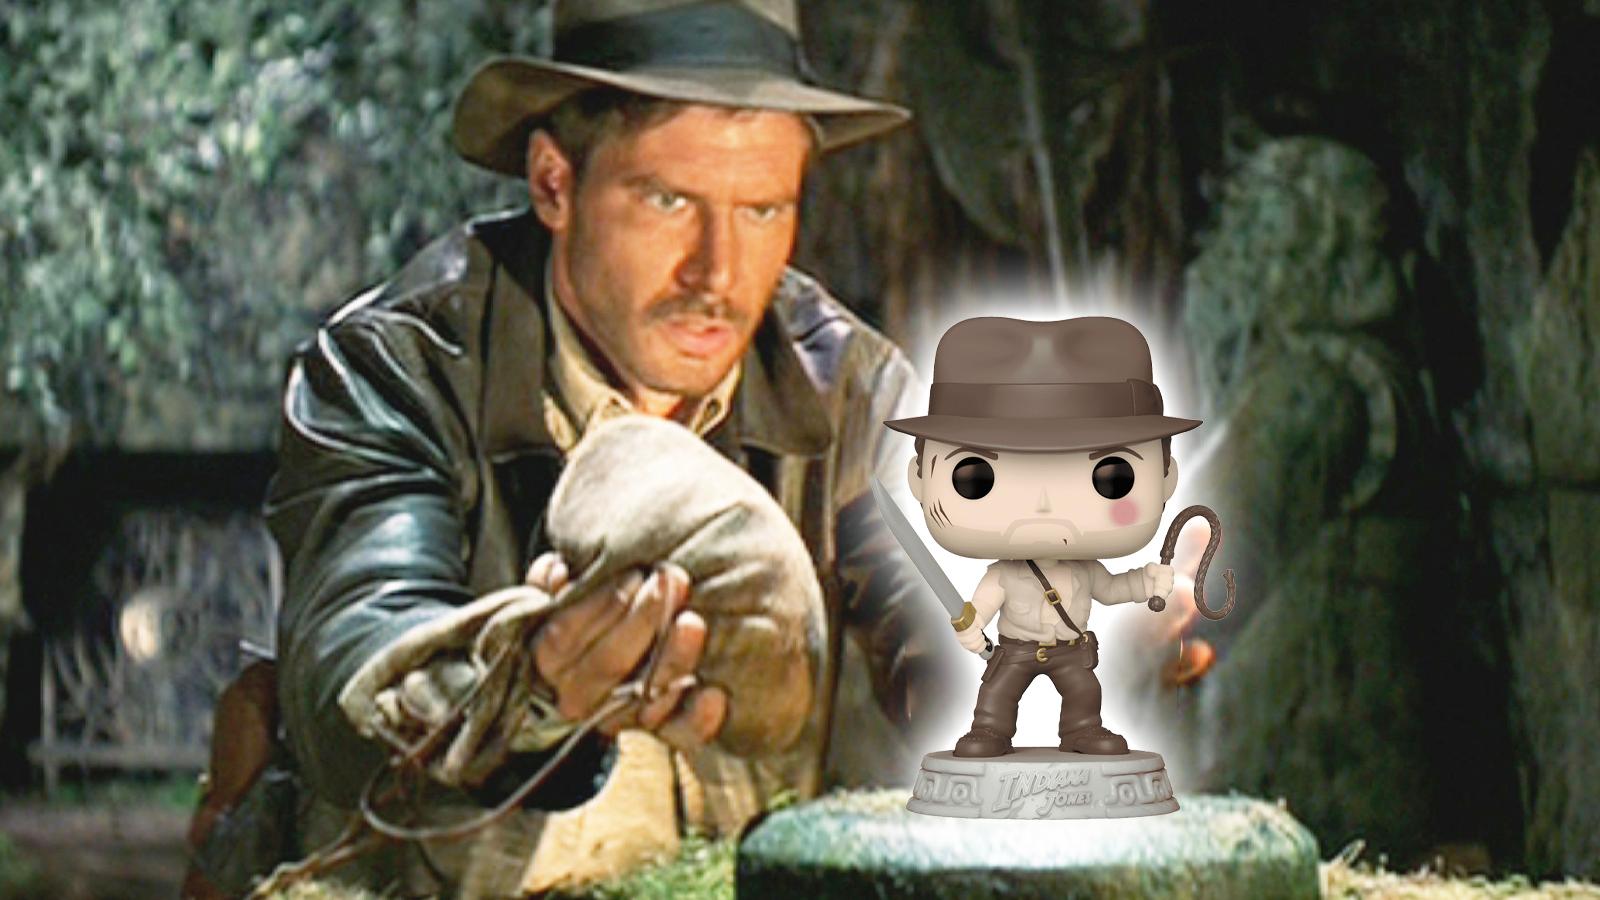 Indiana Jones from Raiders of the Lost Ark replacing the idol with a bag of sand, except the idol has been replaced by a funko pop